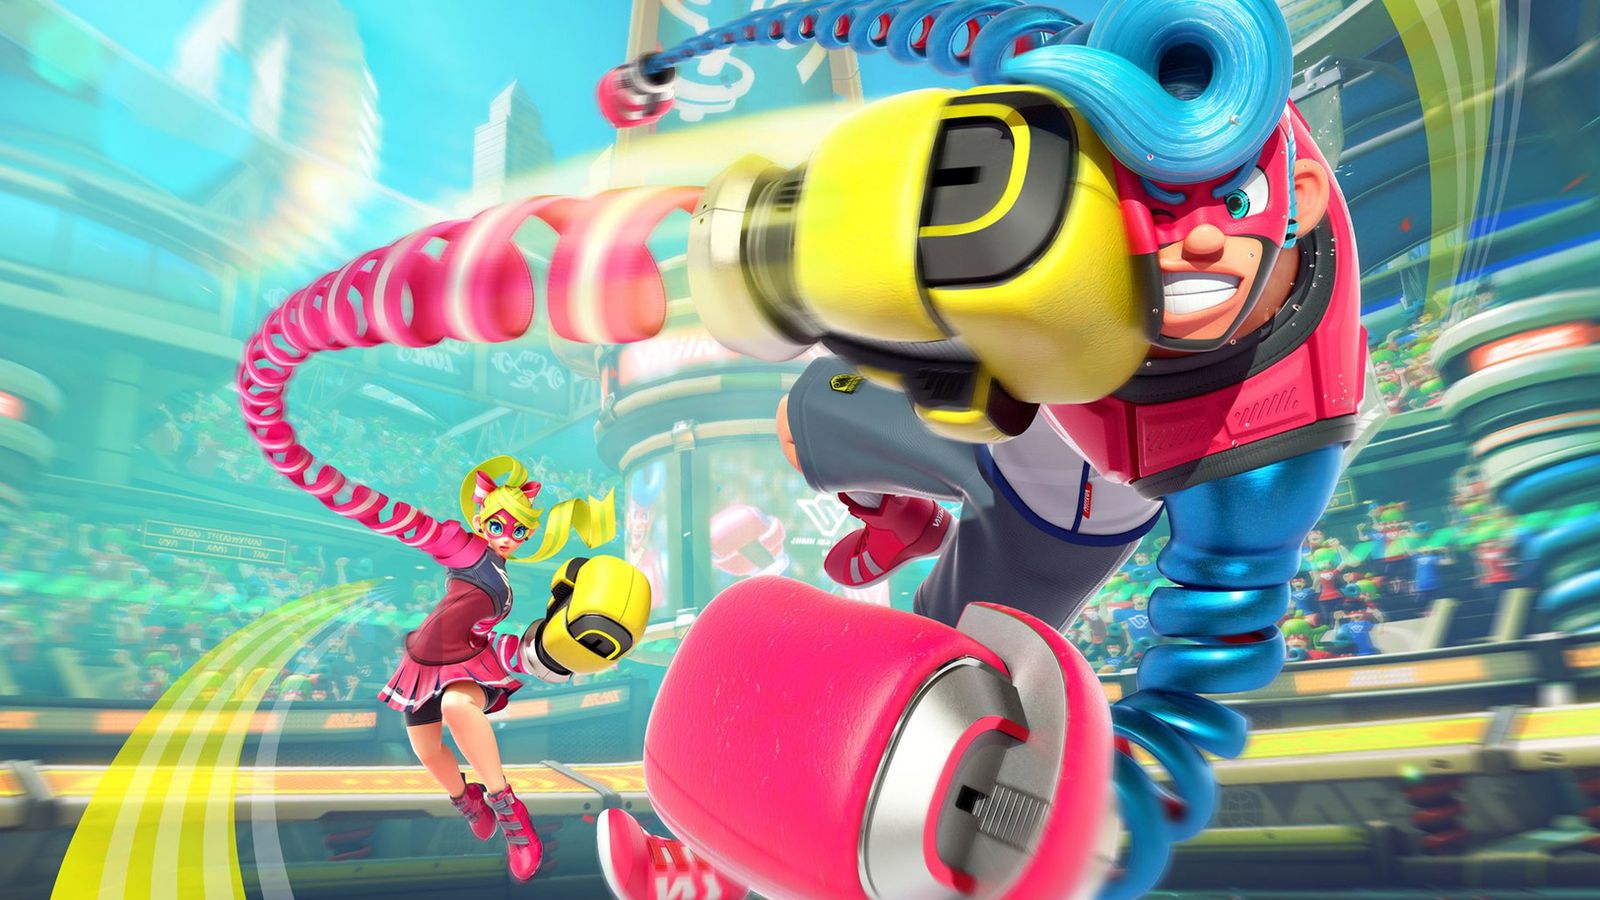 Arms is a fantasy fighter for Nintendo Switch   Polygon